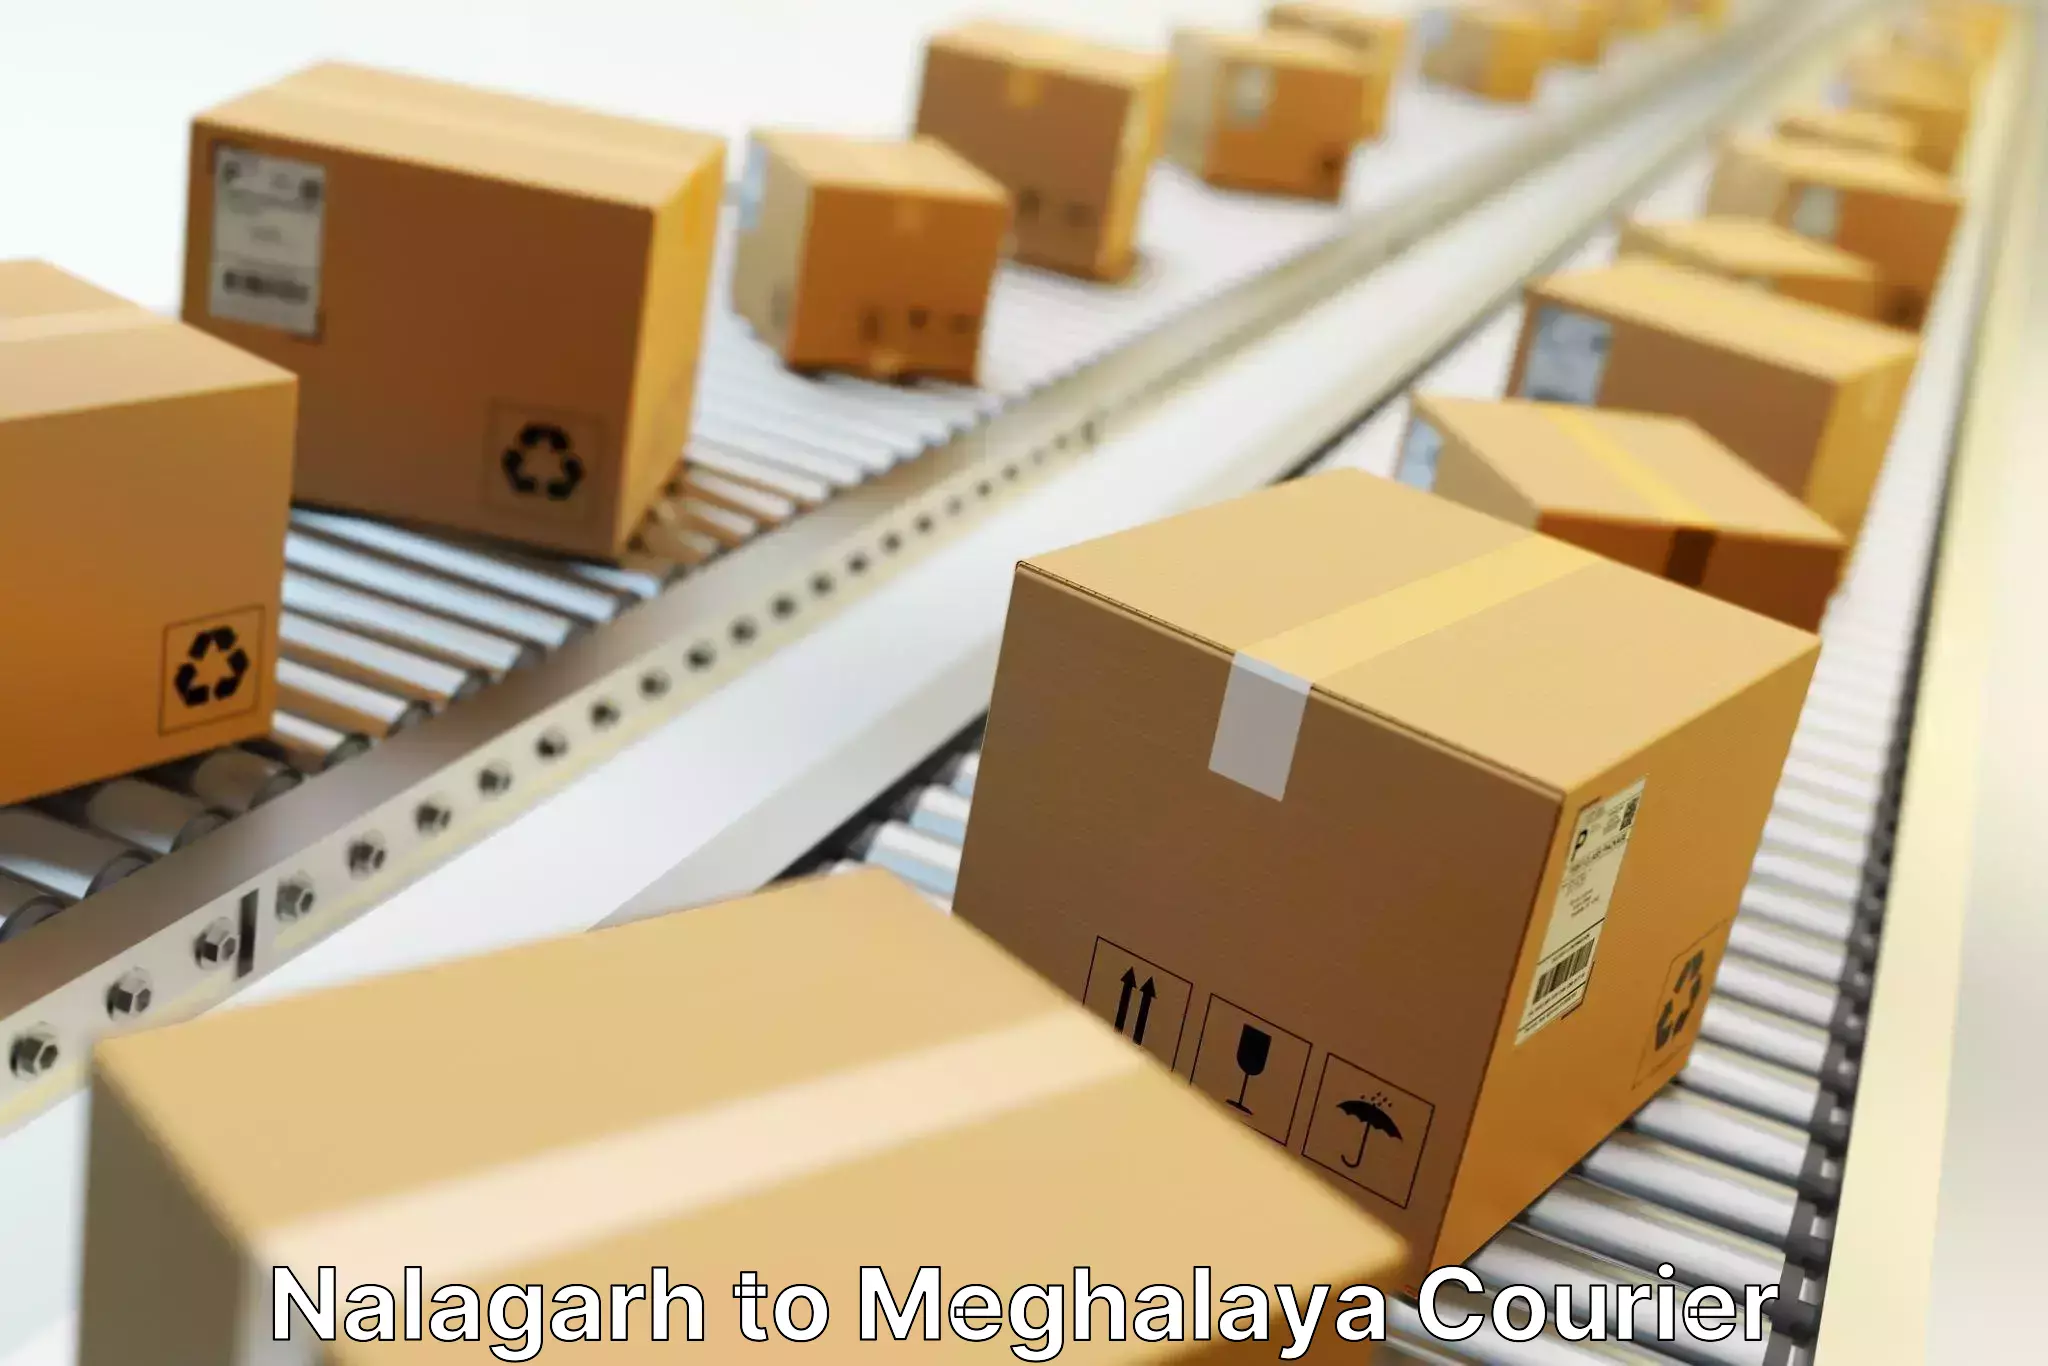 State-of-the-art courier technology Nalagarh to Jaintia Hills